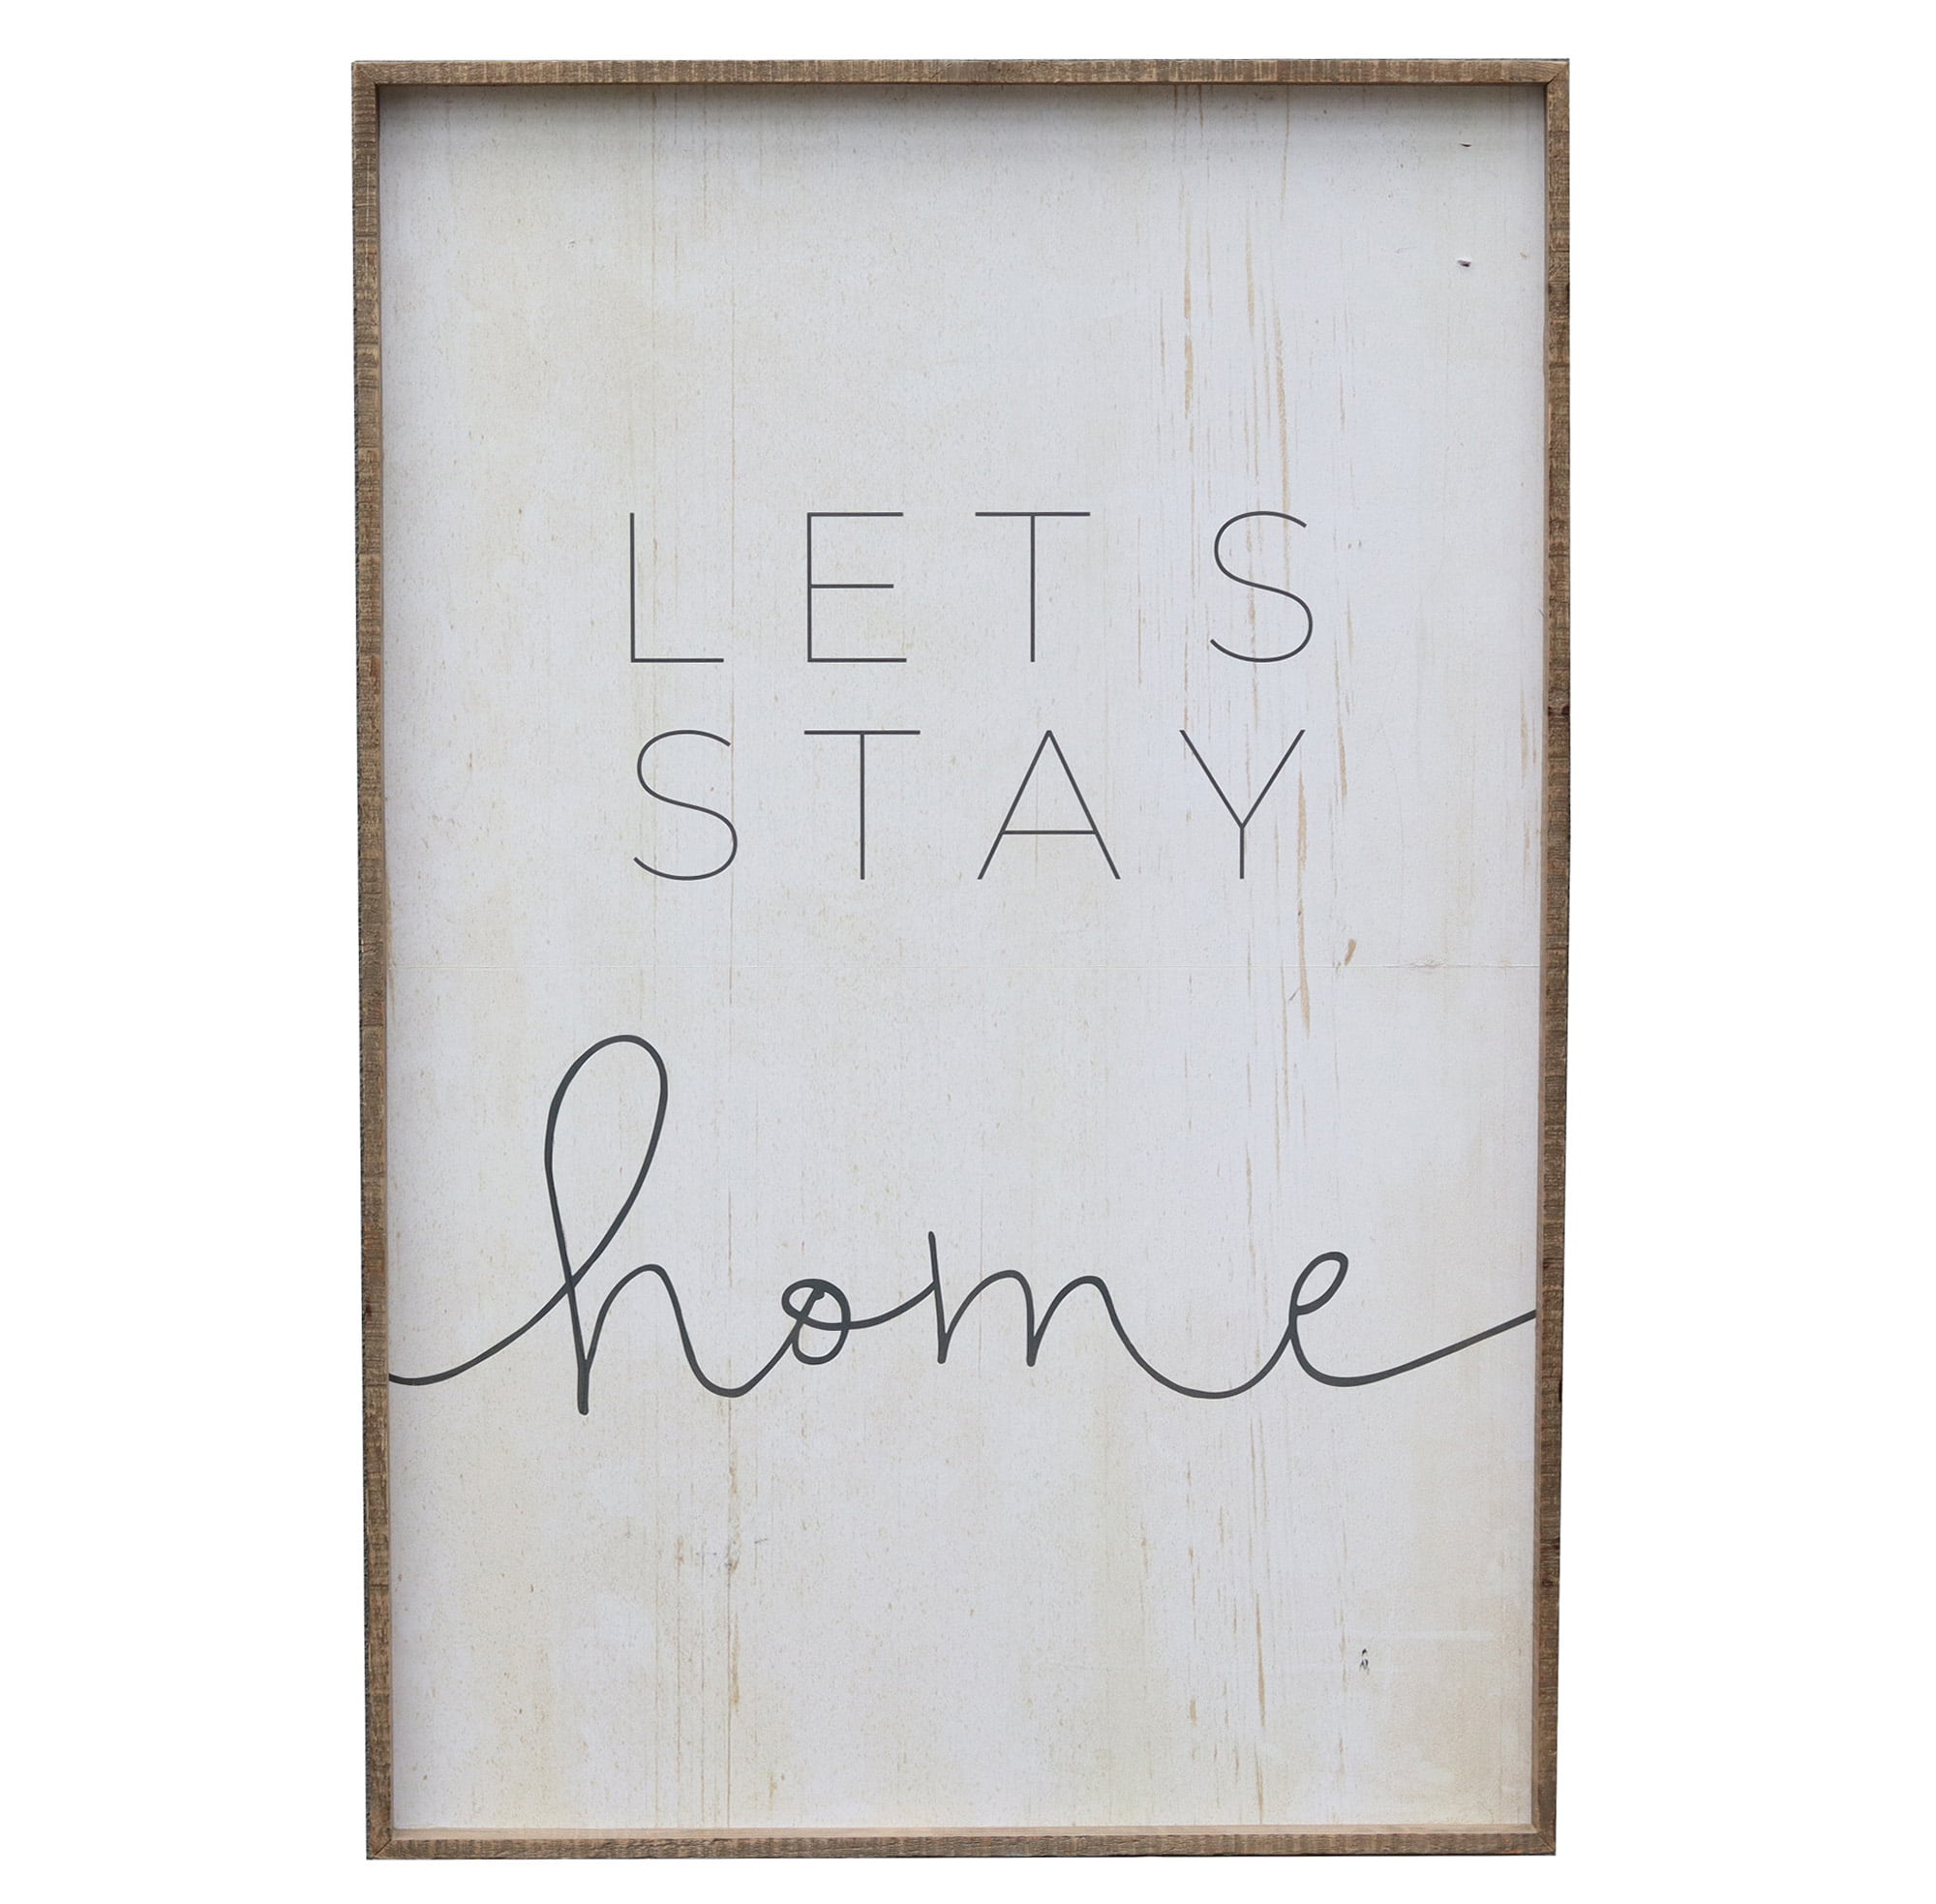 Wedding Gift Farmhouse Style Wall Hanging Housewarming Gift Black and White Wall Decor Let's Stay Home Framed Wood Sign